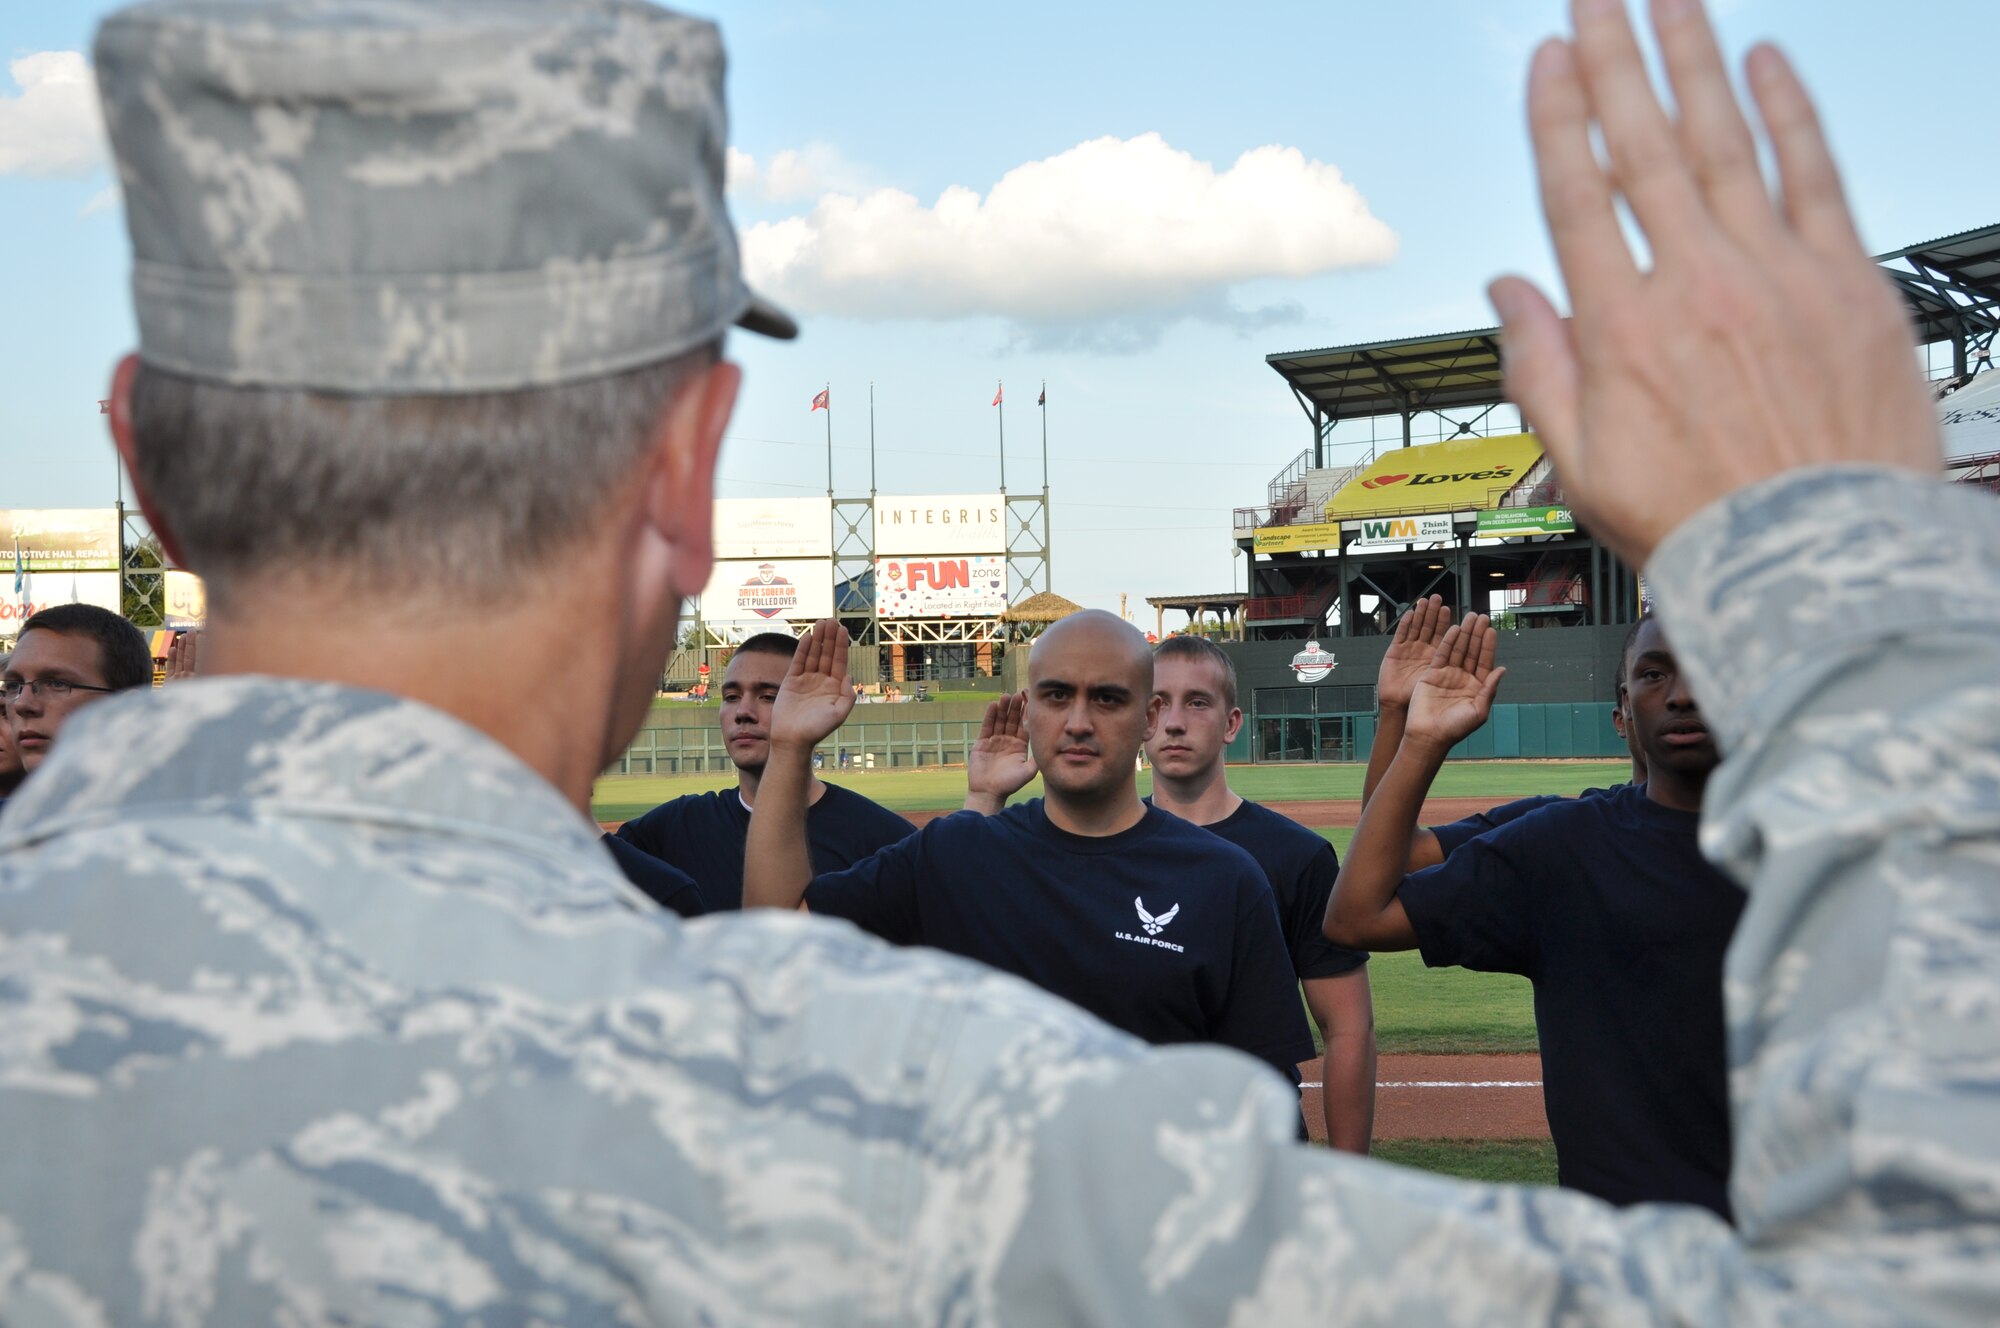 Stormy Archer of Oklahoma City takes the Air Force Oath of Enlistment at the Oklahoma City RedHawks game on July 27. Colonel Russell Muncy, 507th Air Refueling Wing commander administered the oath to 26 new recruits before the start of the 2nd inning.  Archer wanted to join the Air Force to follow the footsteps of his father.  He heads to basic military training in November and will be serving in the public affairs career field after BMT graduation. (U.S. Air Force Photo/Maj. Jon Quinlan) 